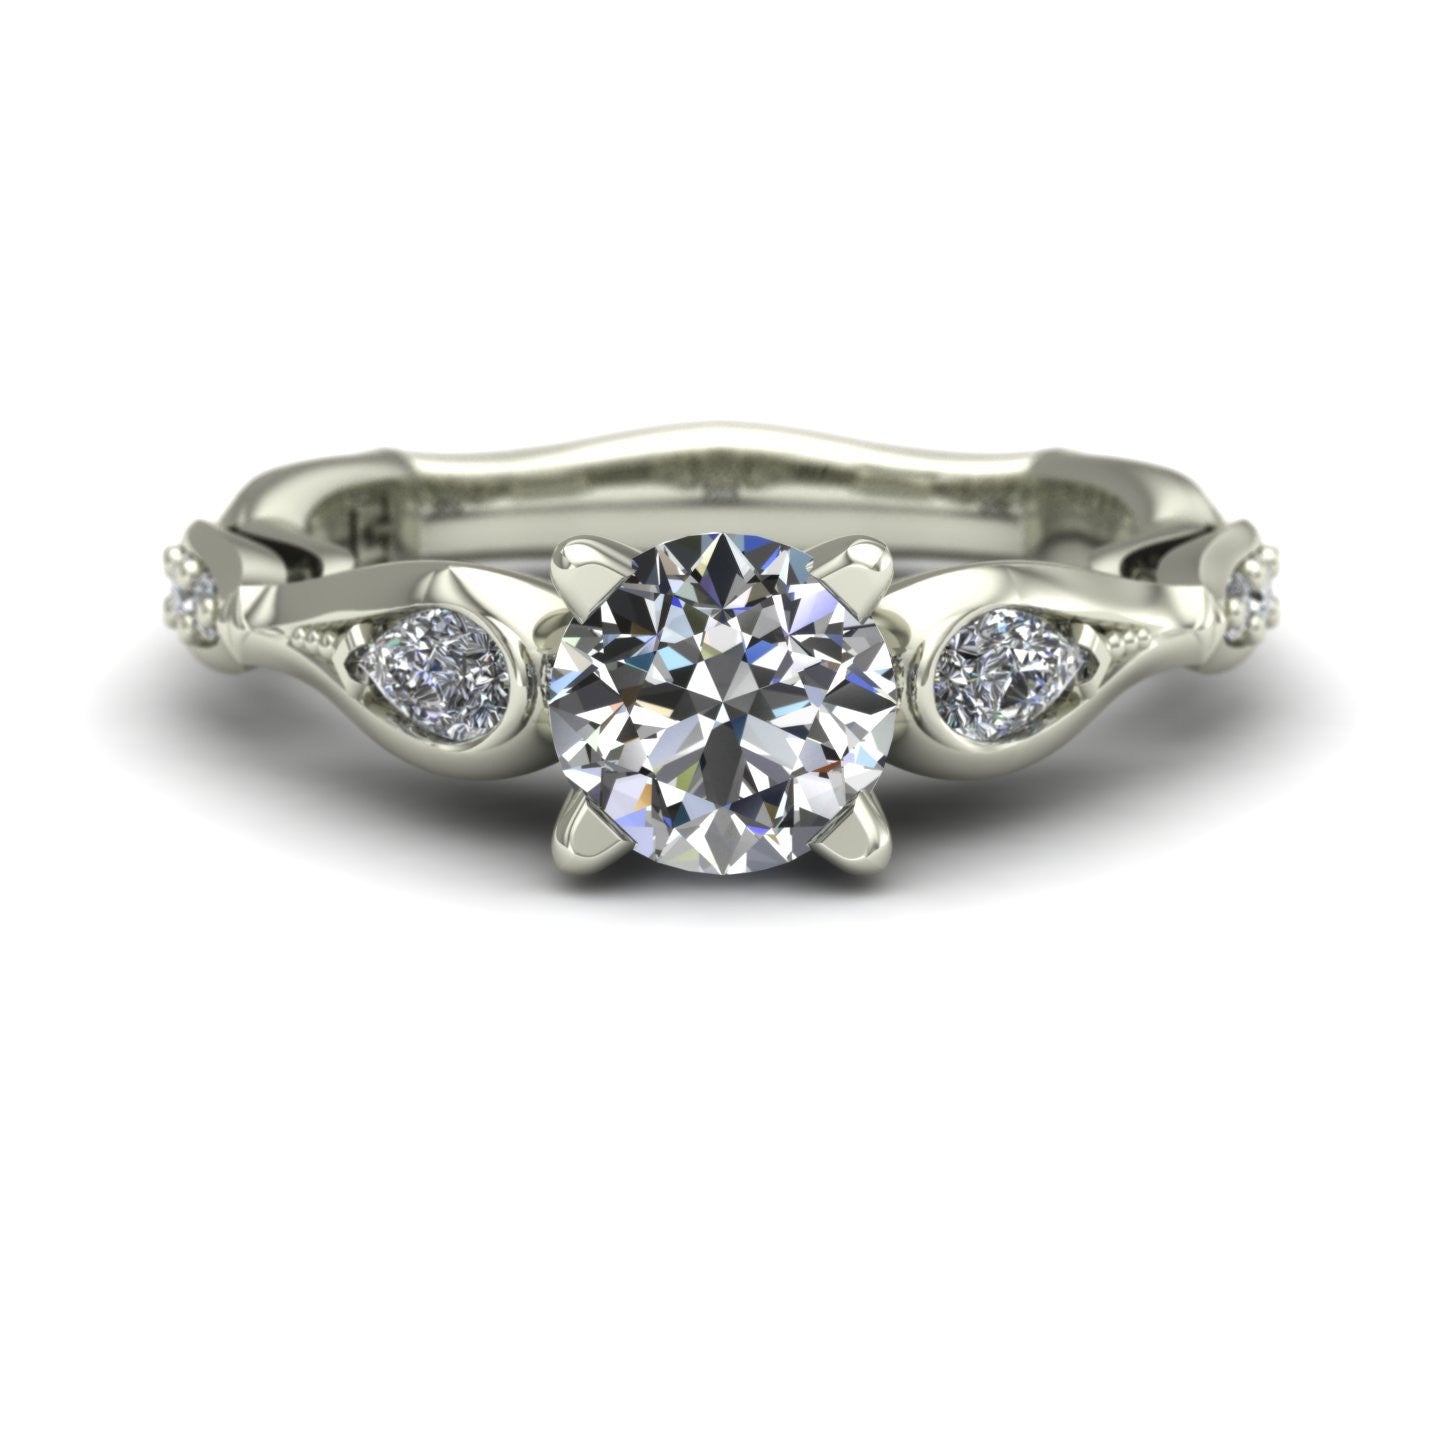 1ct diamond engagement ring with pear sides in 18k white gold - Charles Babb Designs - top view